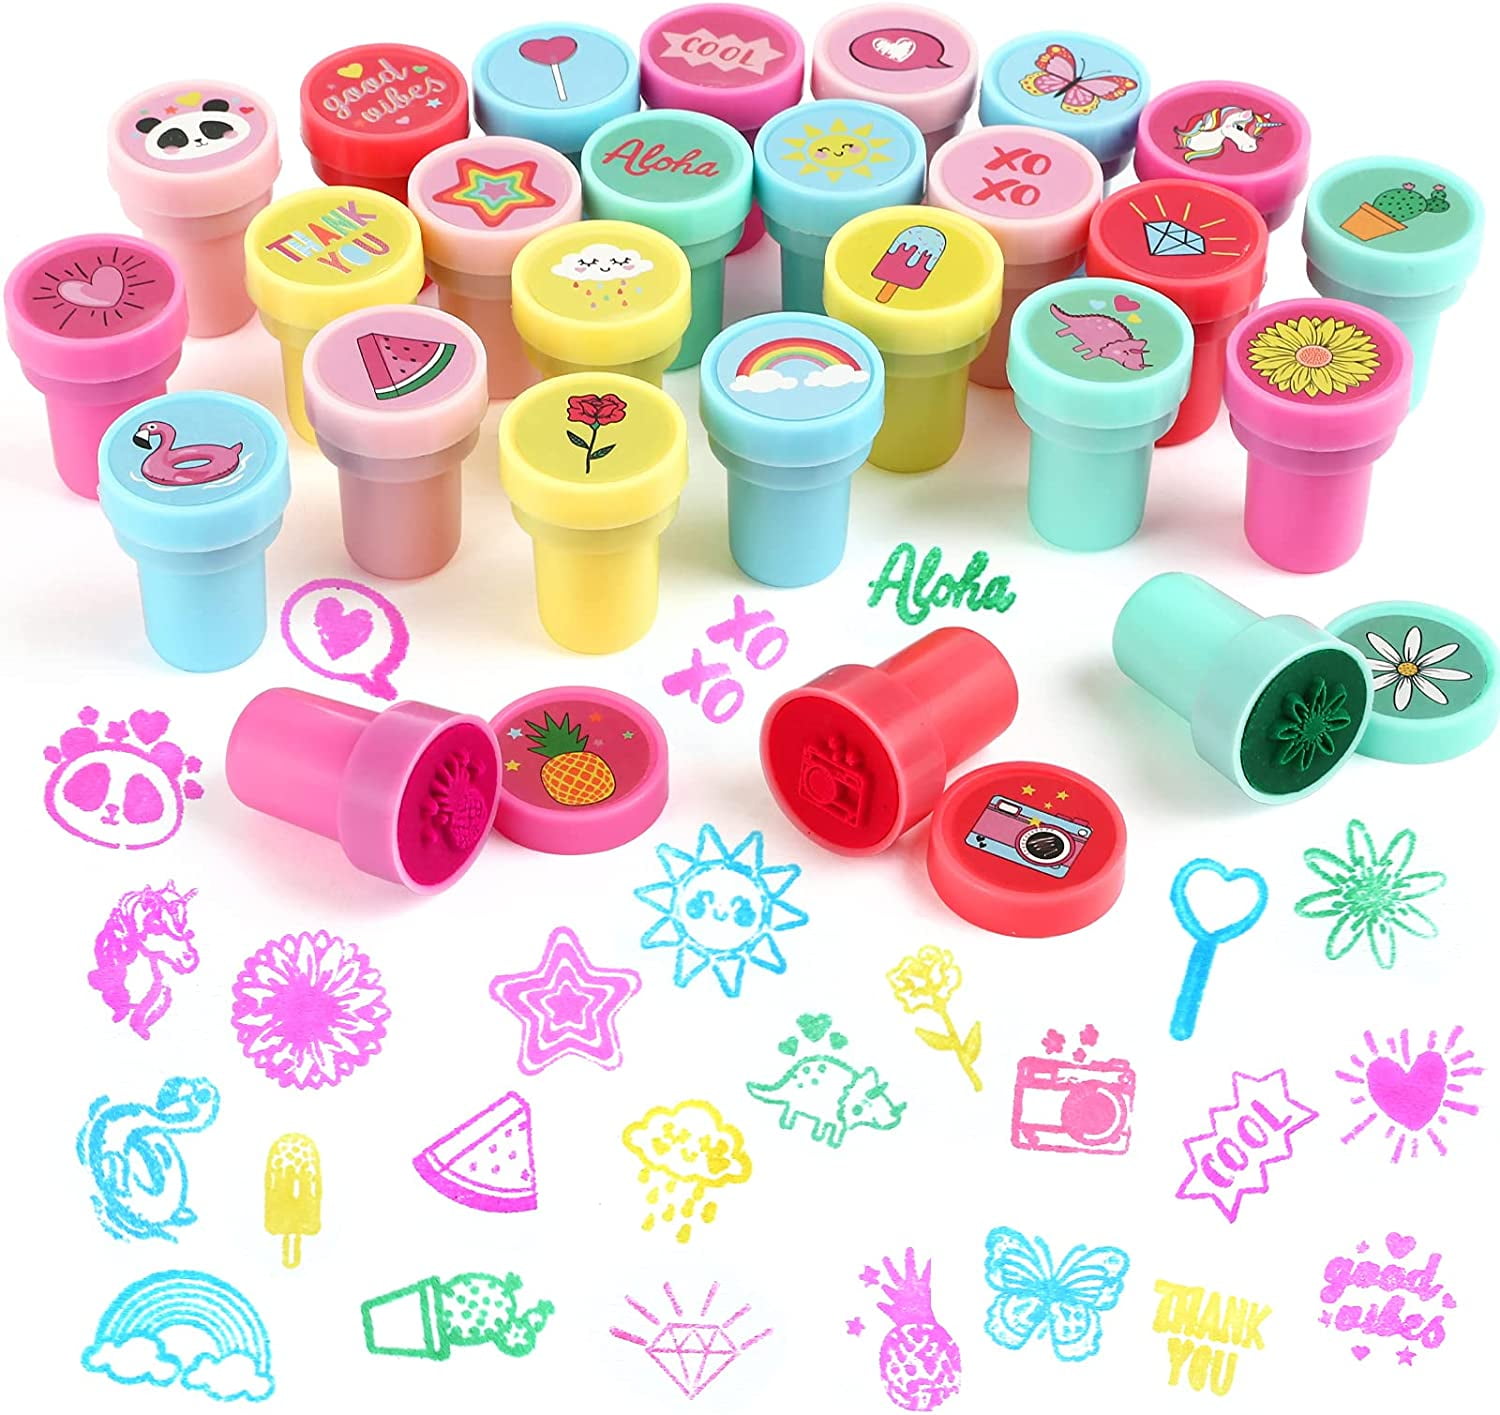 26 KIDS FUN STAMPS Animal Shape/Numbers Children Toy SELF INK